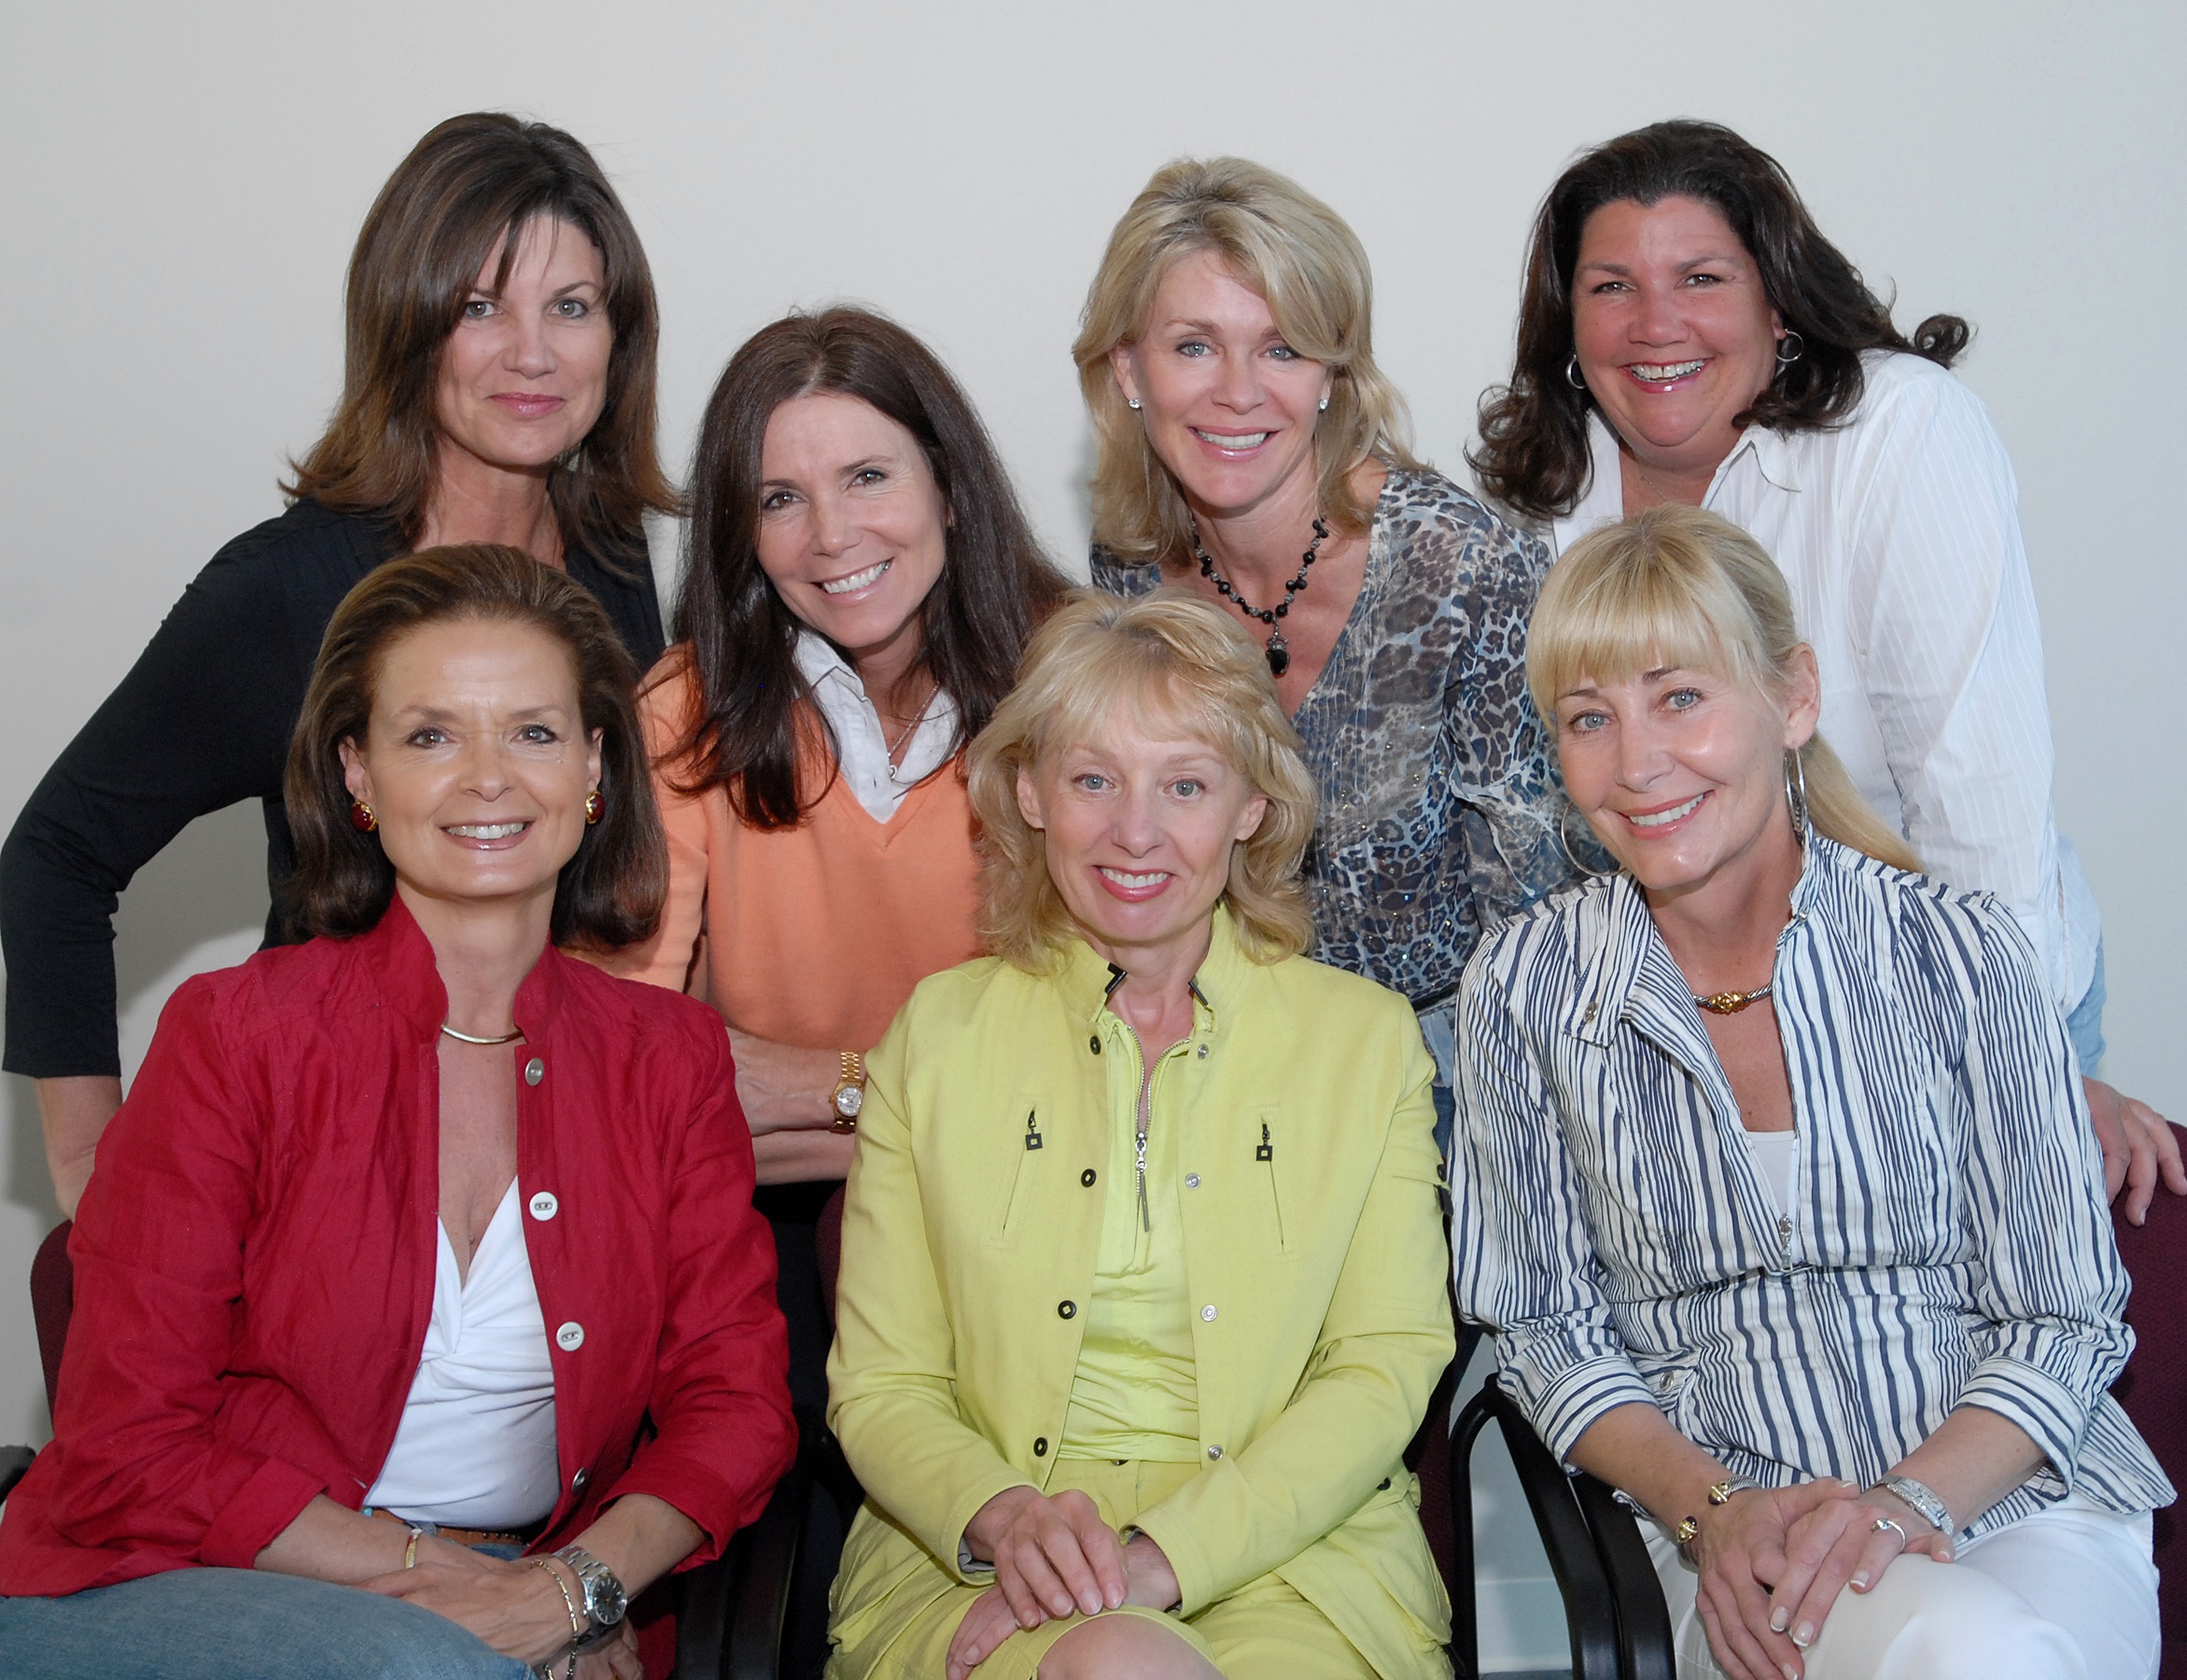 Palm Springs Women In Film and Televison Board Members